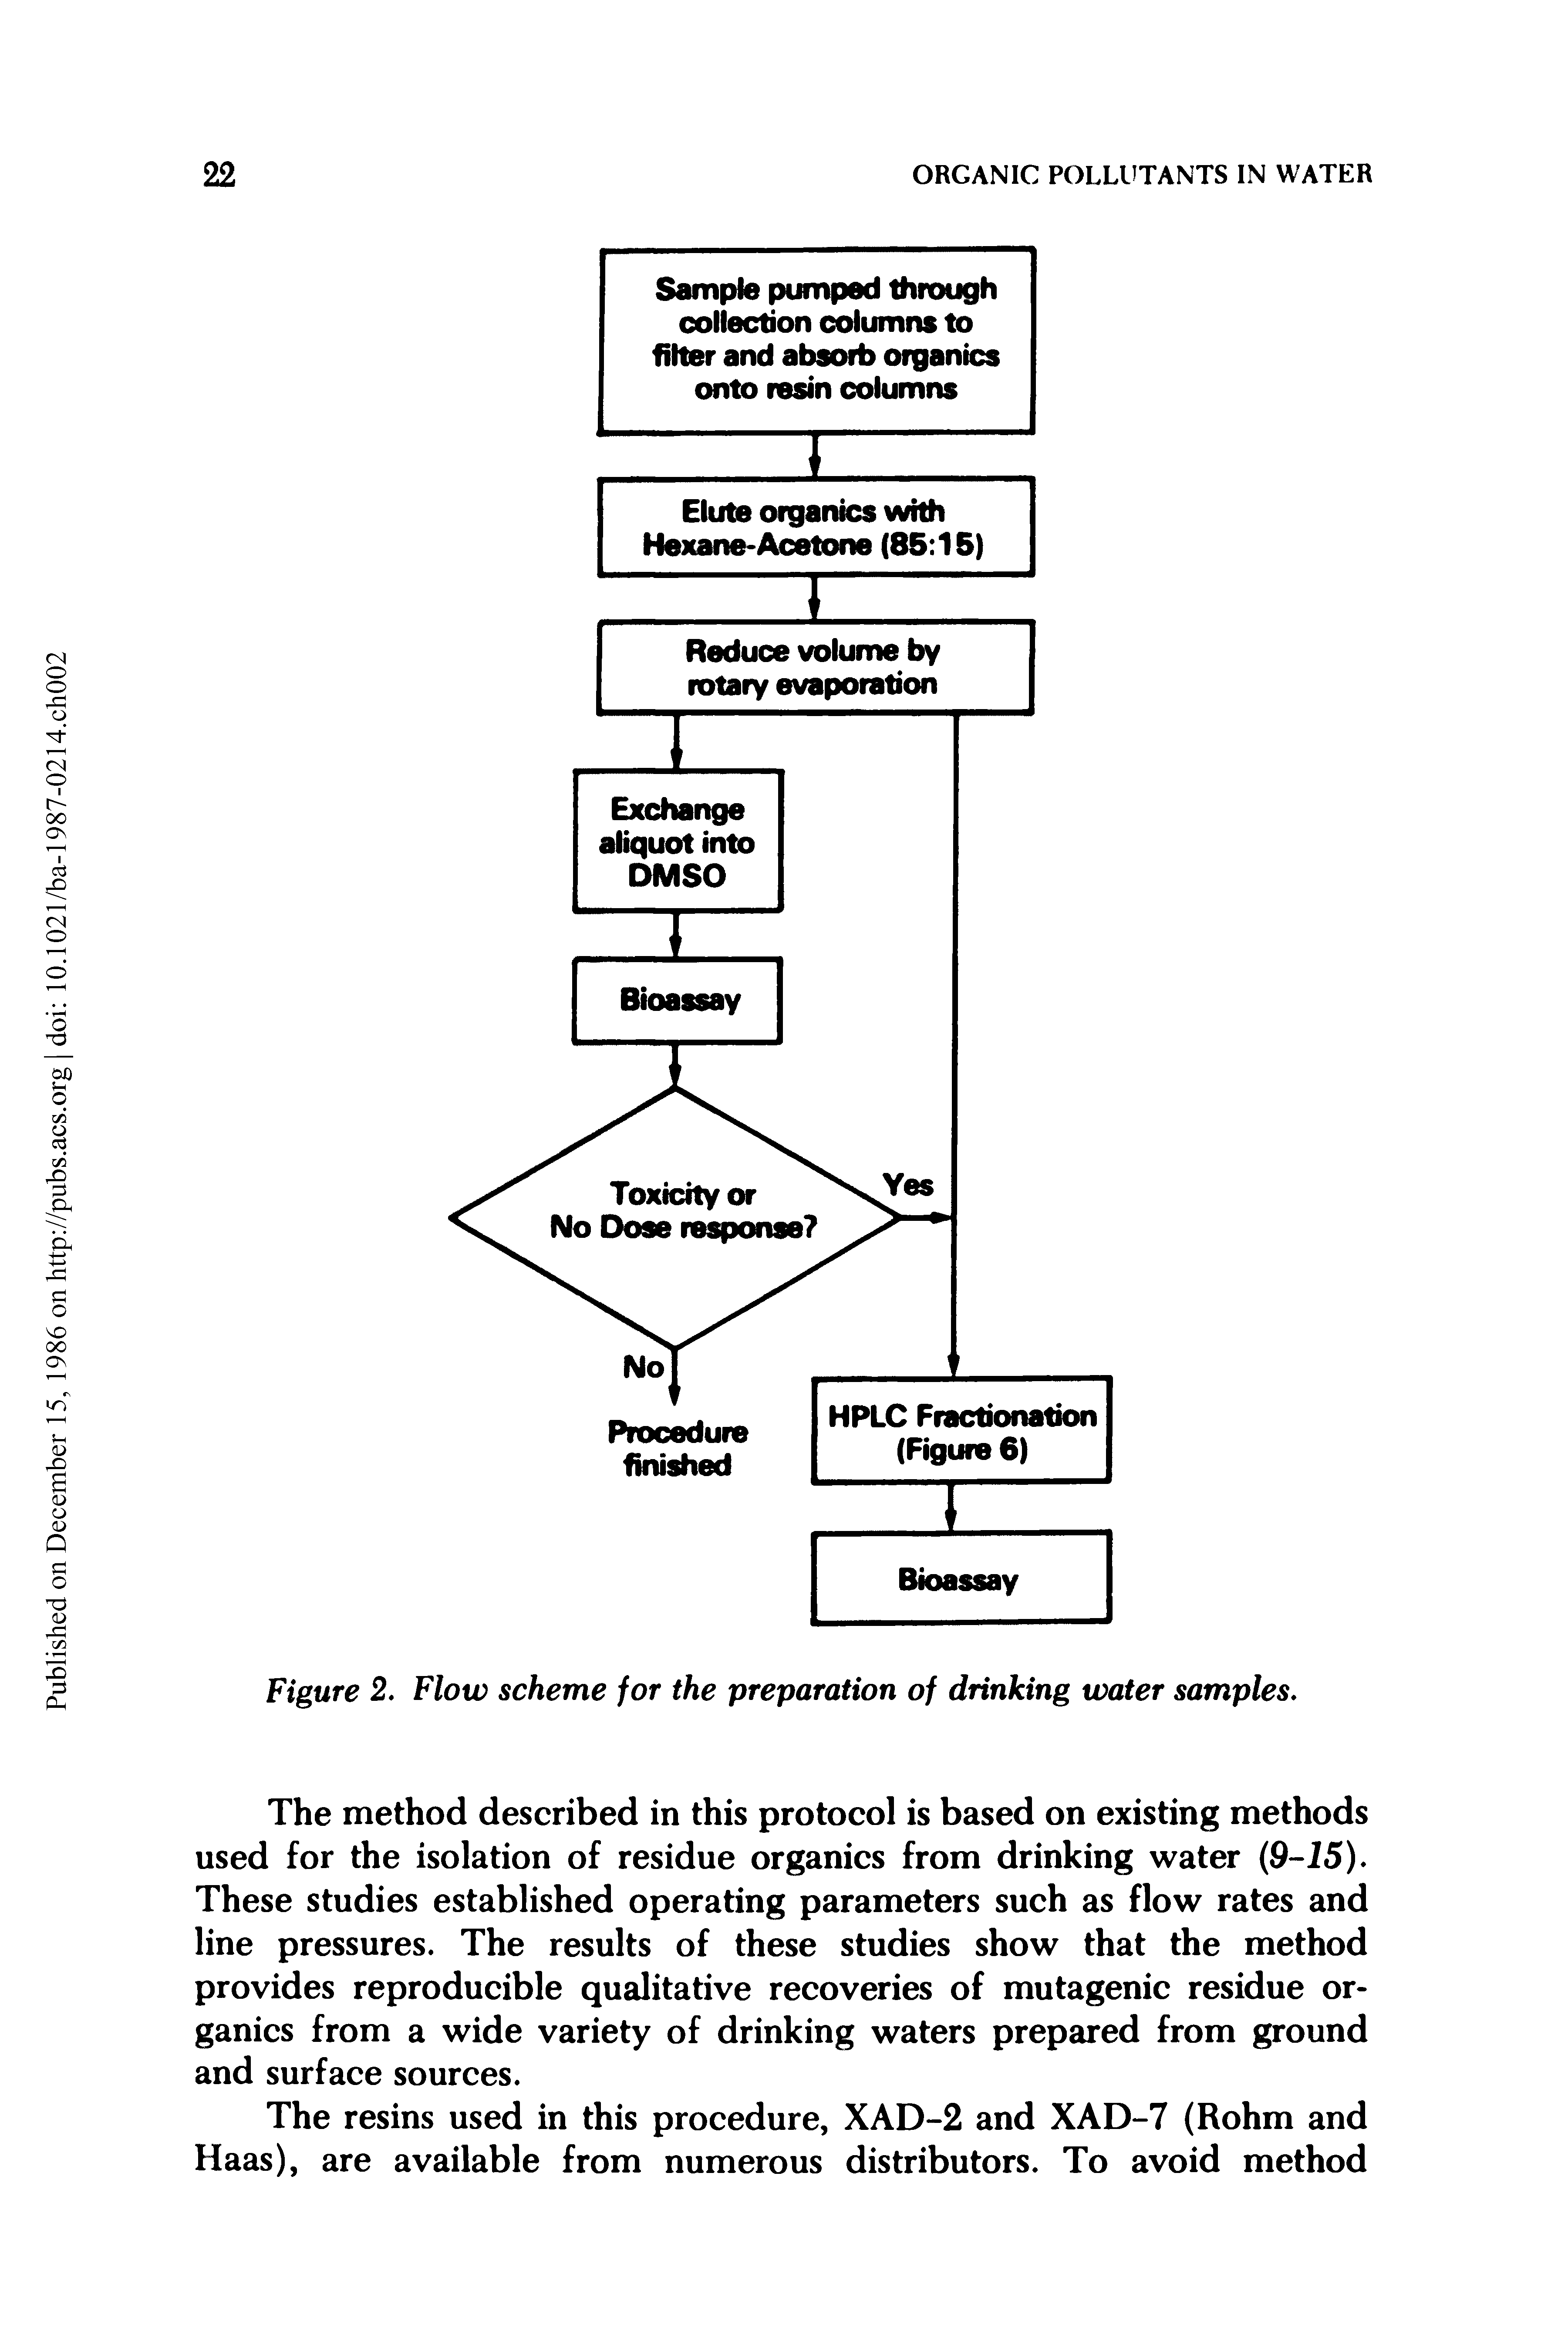 Figure 2. Flow scheme for the preparation of drinking water samples.